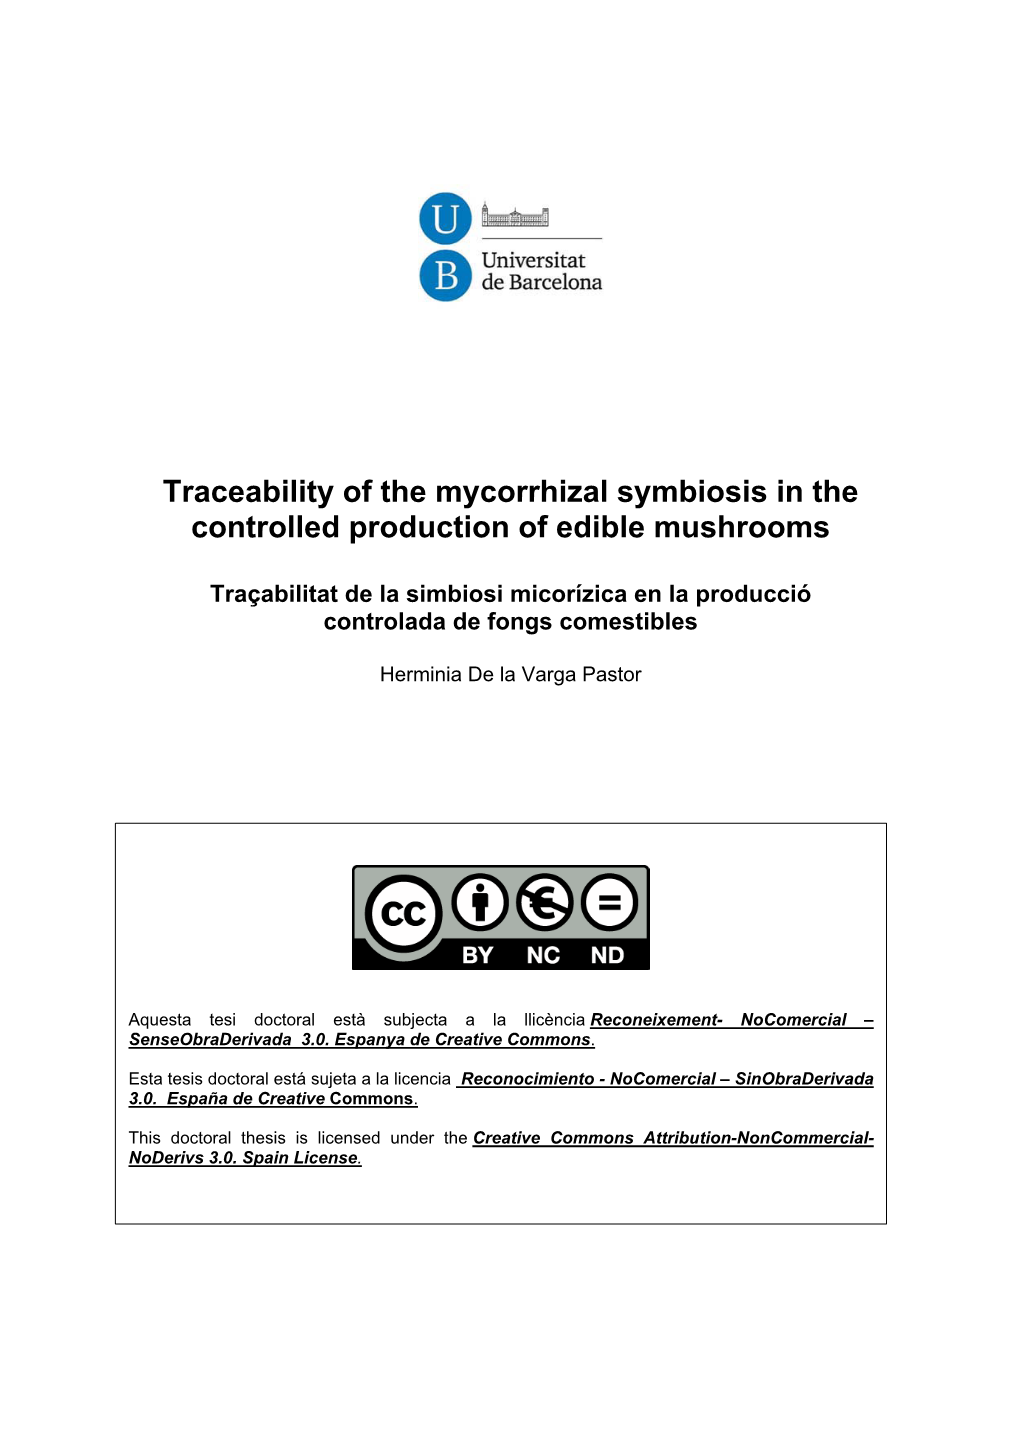 Traceability of the Mycorrhizal Symbiosis in the Controlled Production of Edible Mushrooms